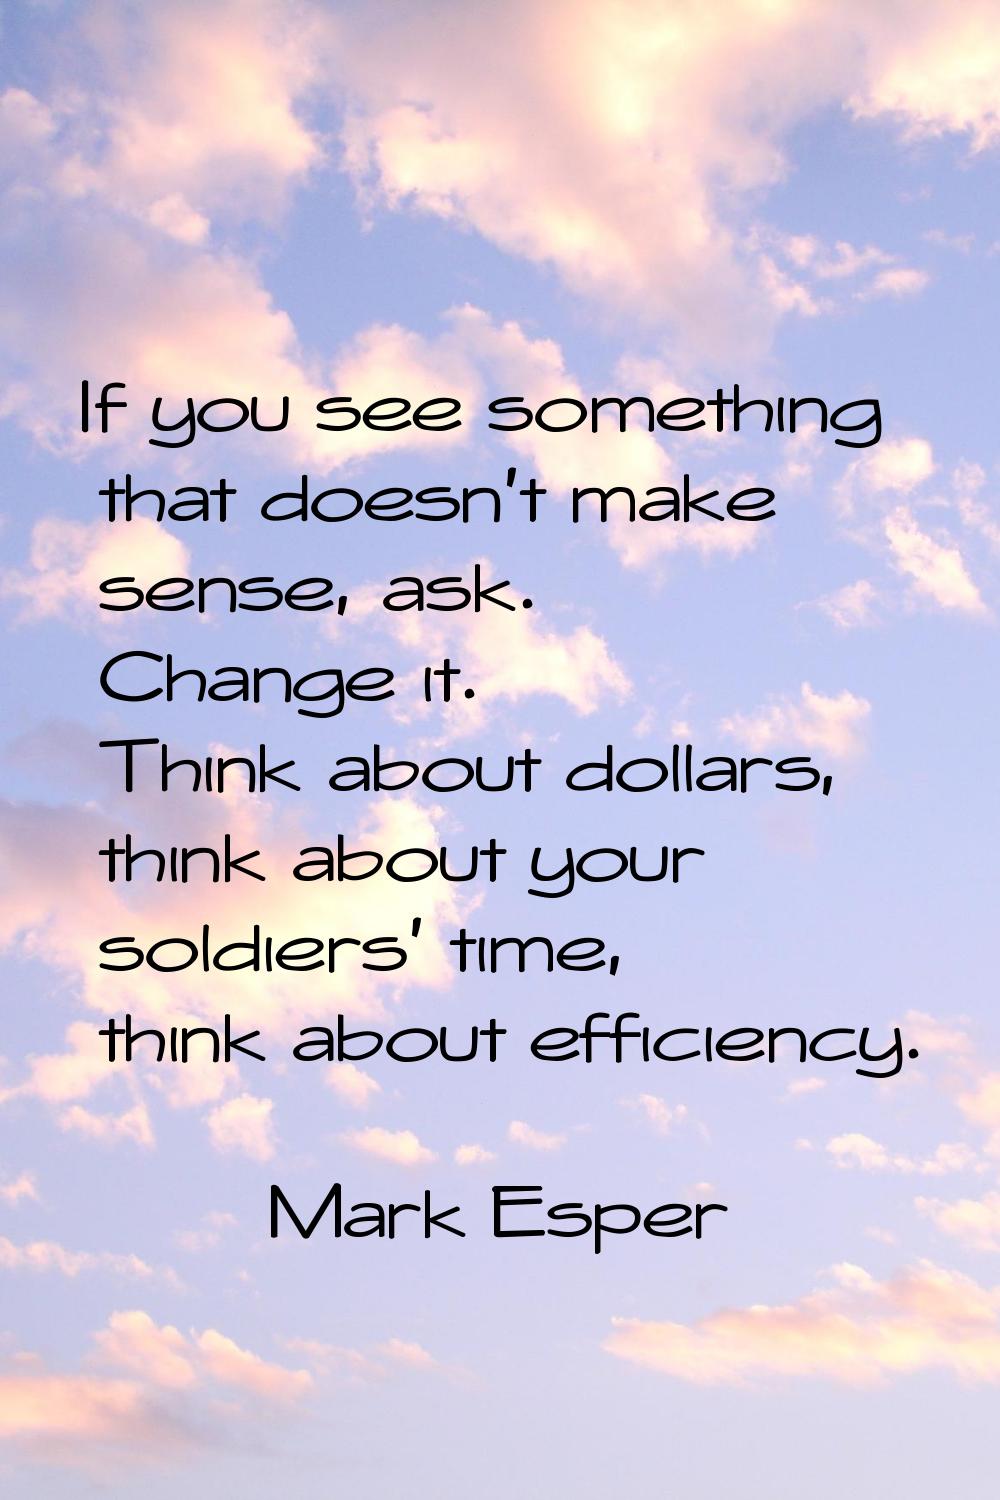 If you see something that doesn't make sense, ask. Change it. Think about dollars, think about your